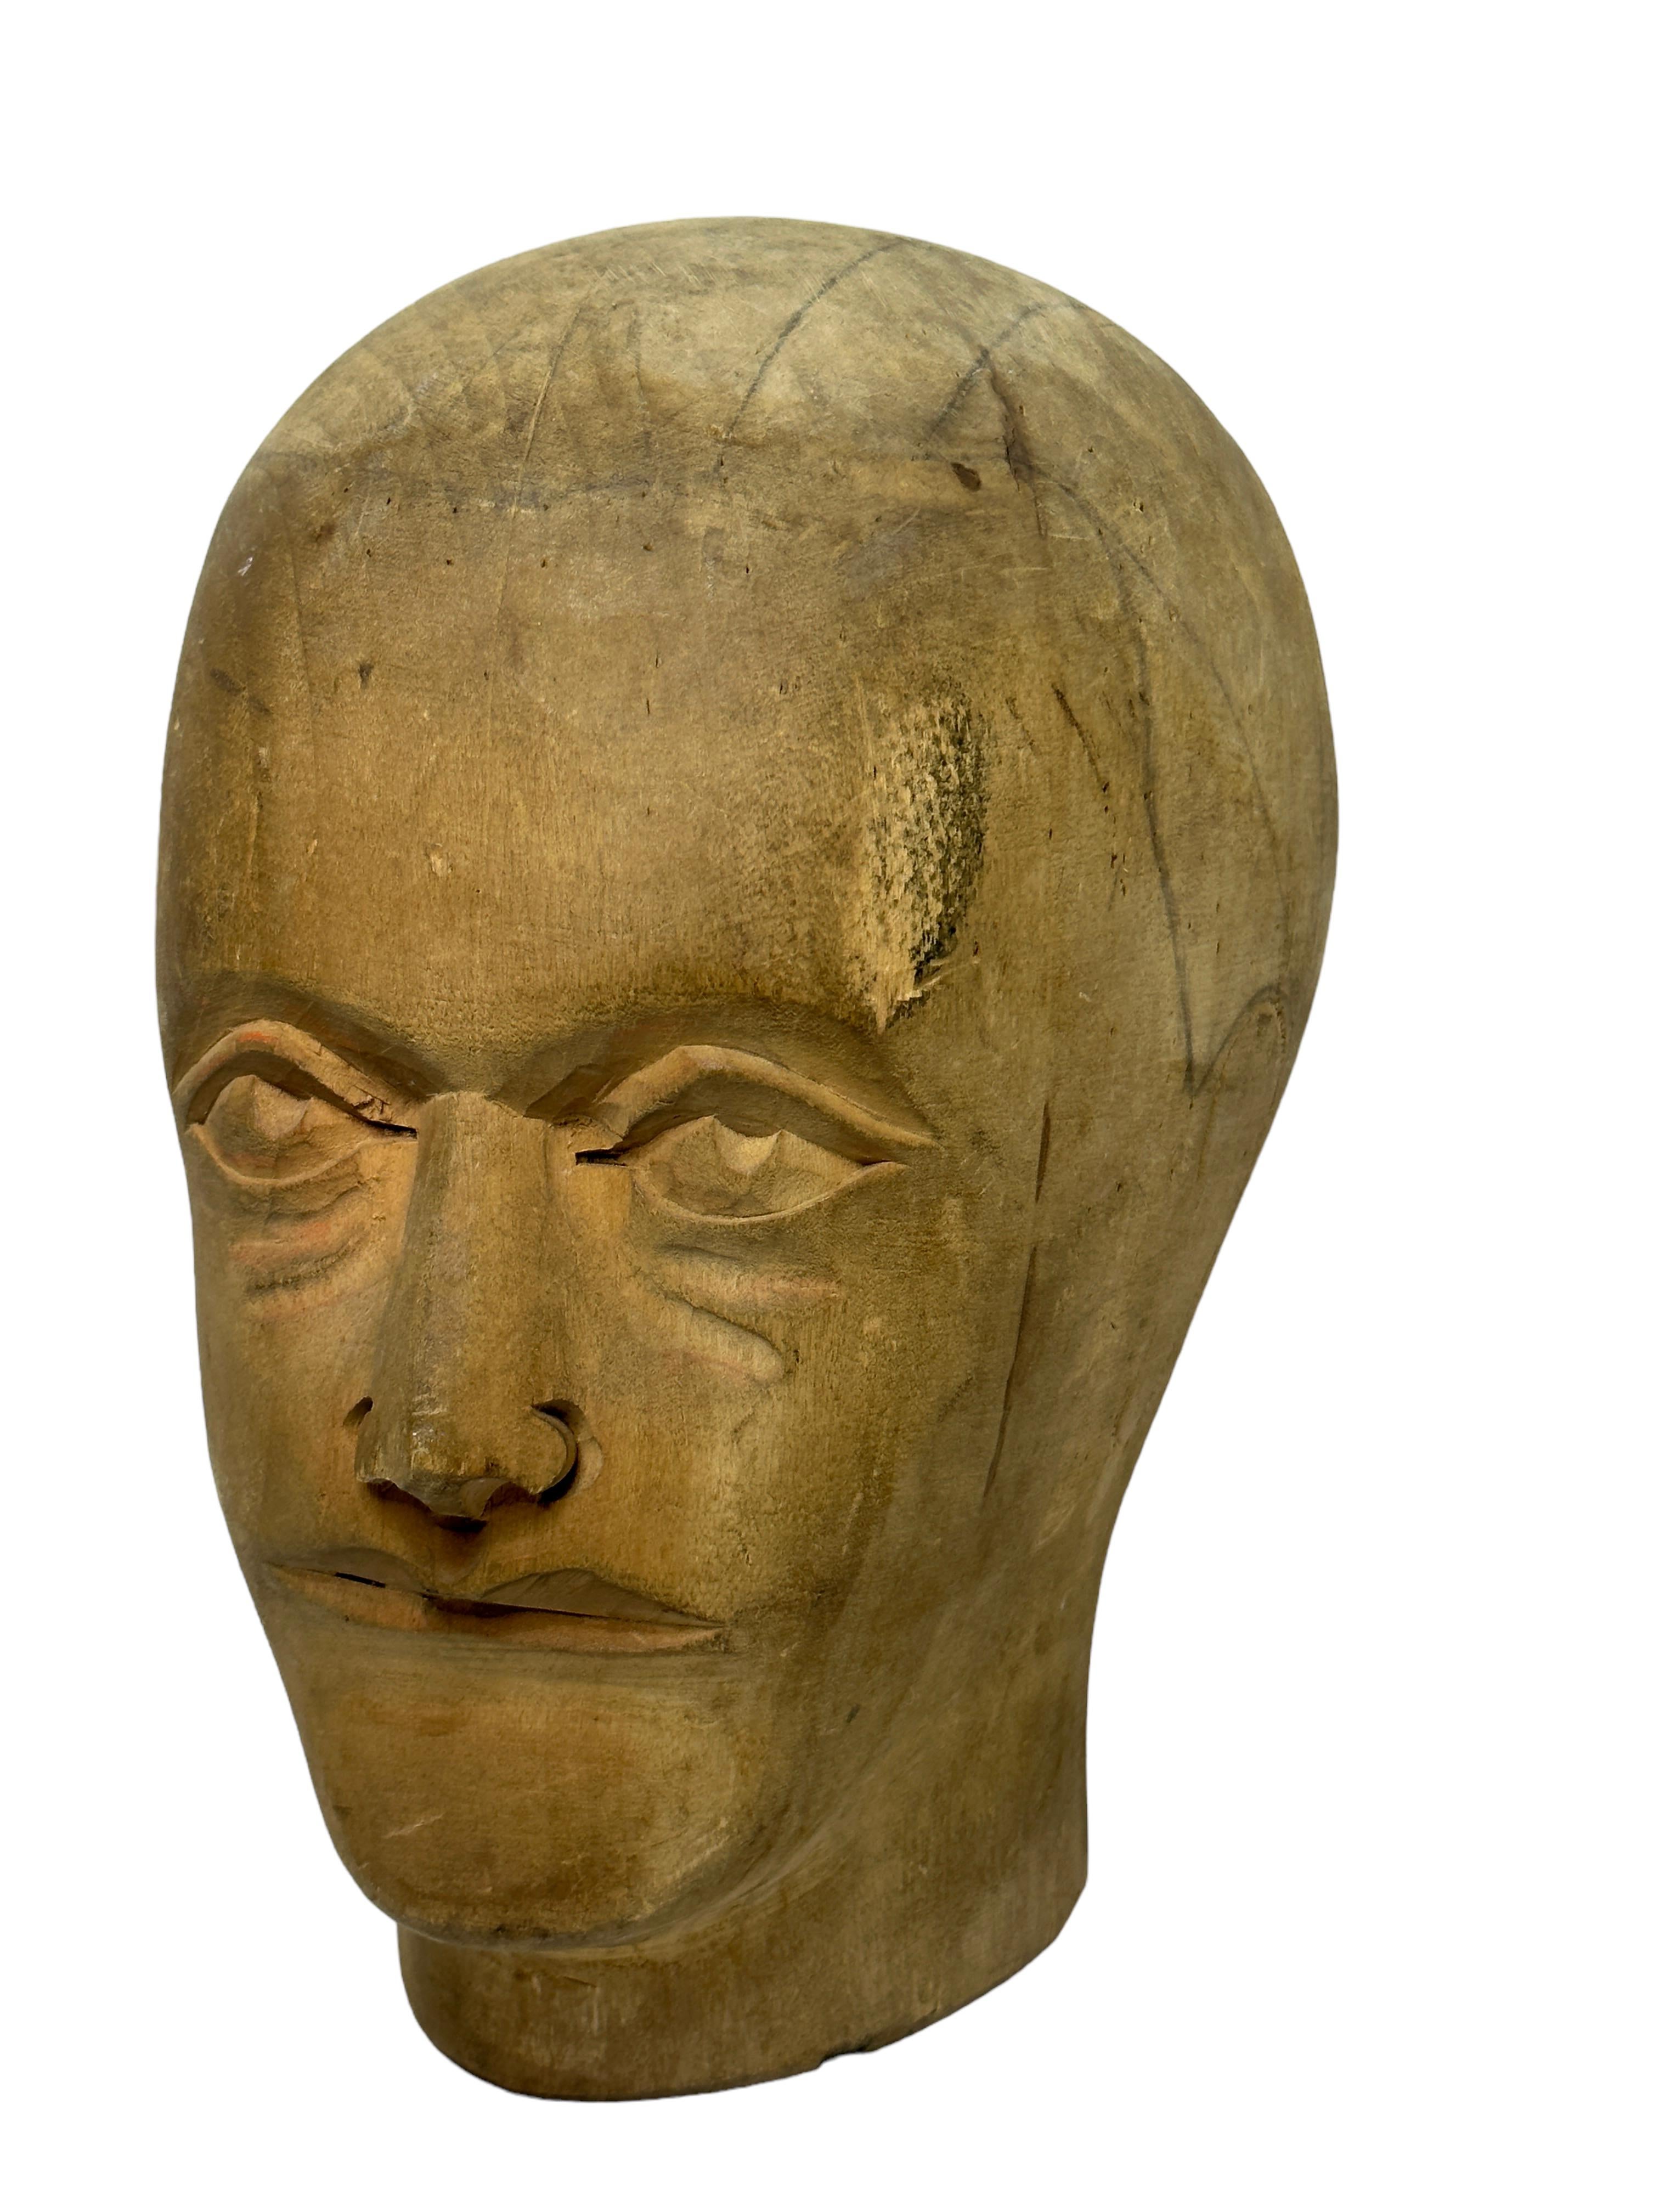 Adorable unique wood carved head. Austria, 1910s. Ideal decoration item, used in the displaying and making of hats. Hand carved from wood. Nice display piece in any room. Found at an Estate Sale in Vienna, Austria.